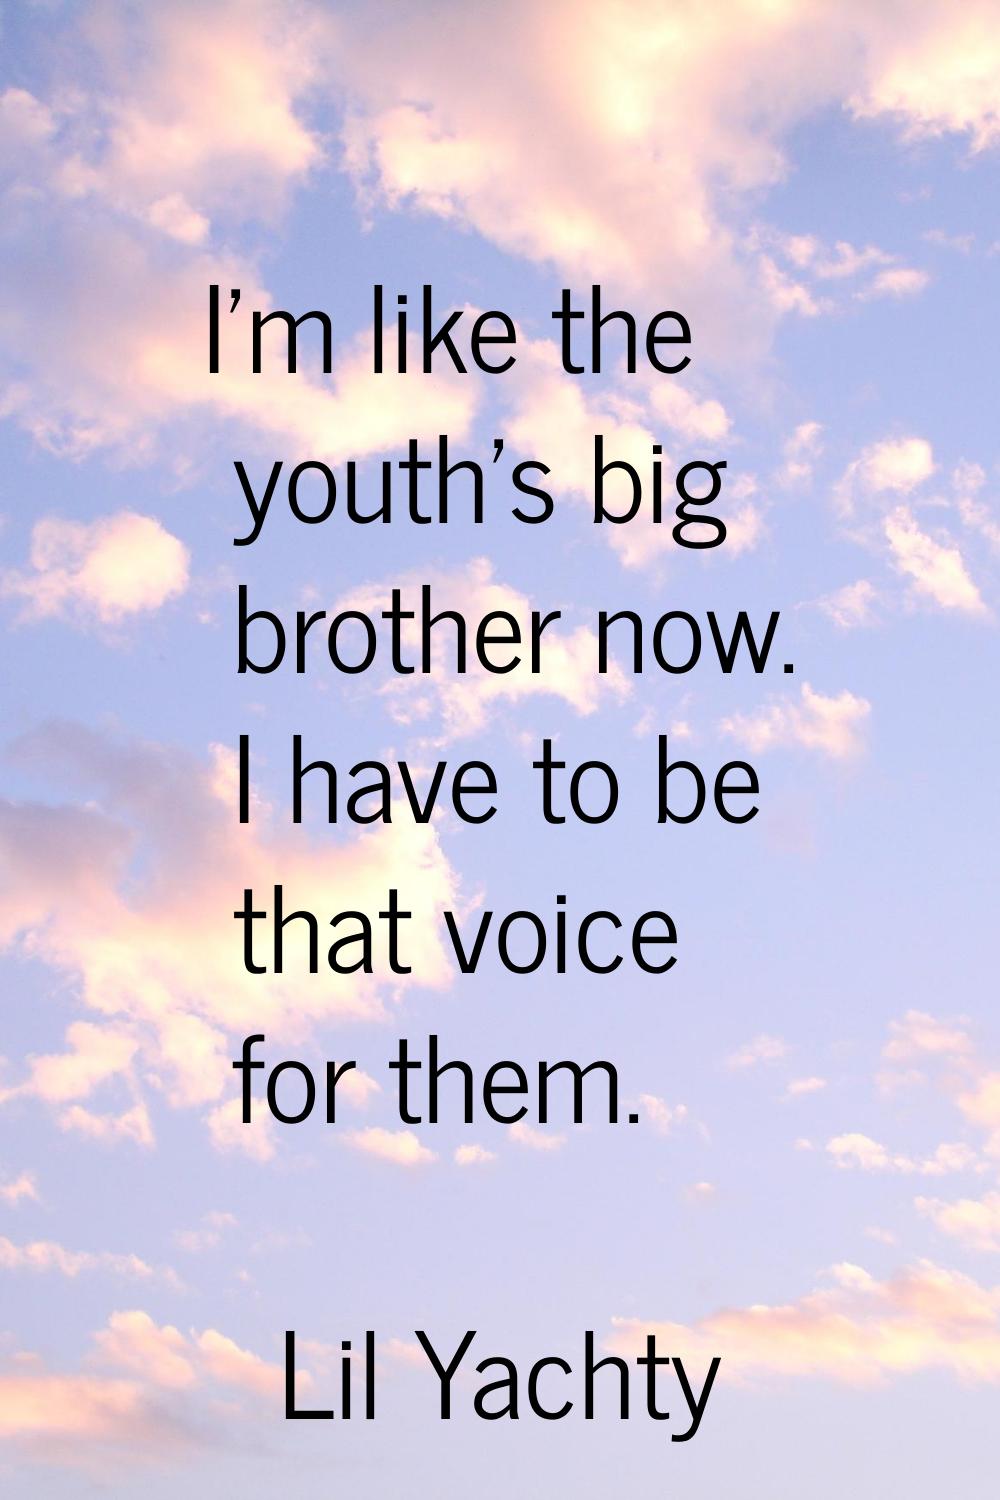 I'm like the youth's big brother now. I have to be that voice for them.